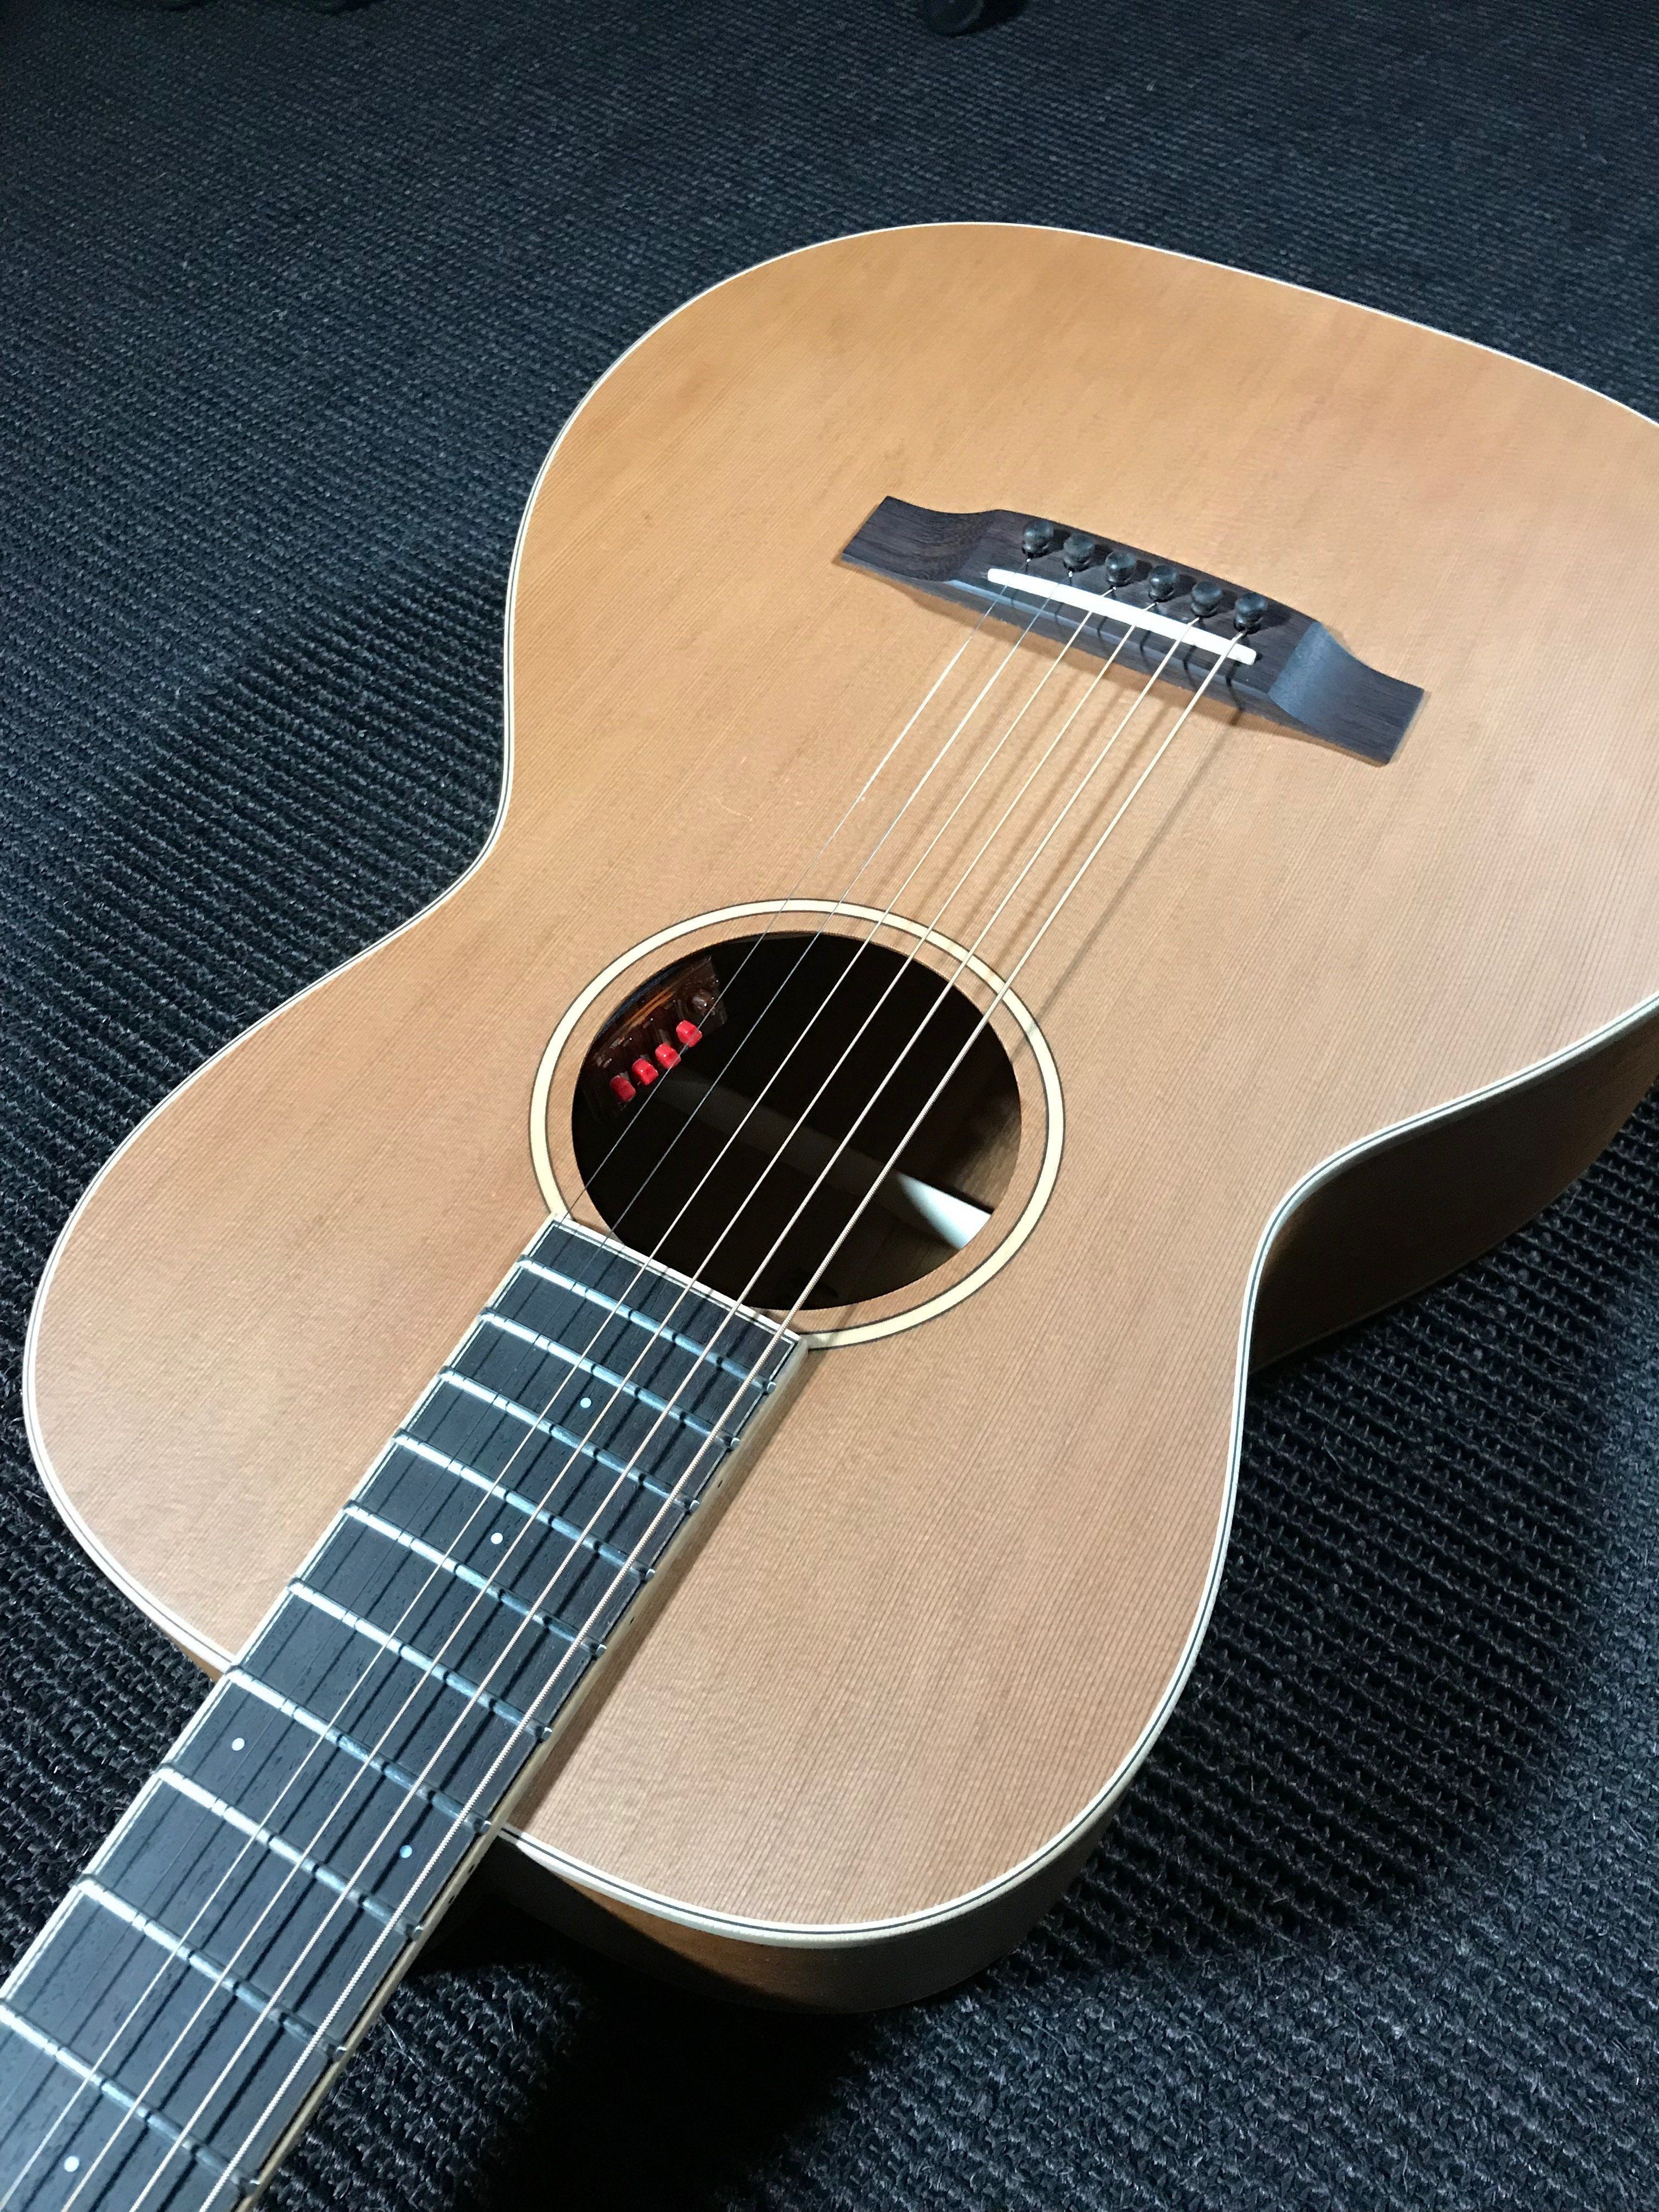 Auden Neo Emily Rose Left Handed., Electro Acoustic Guitar for sale at Richards Guitars.